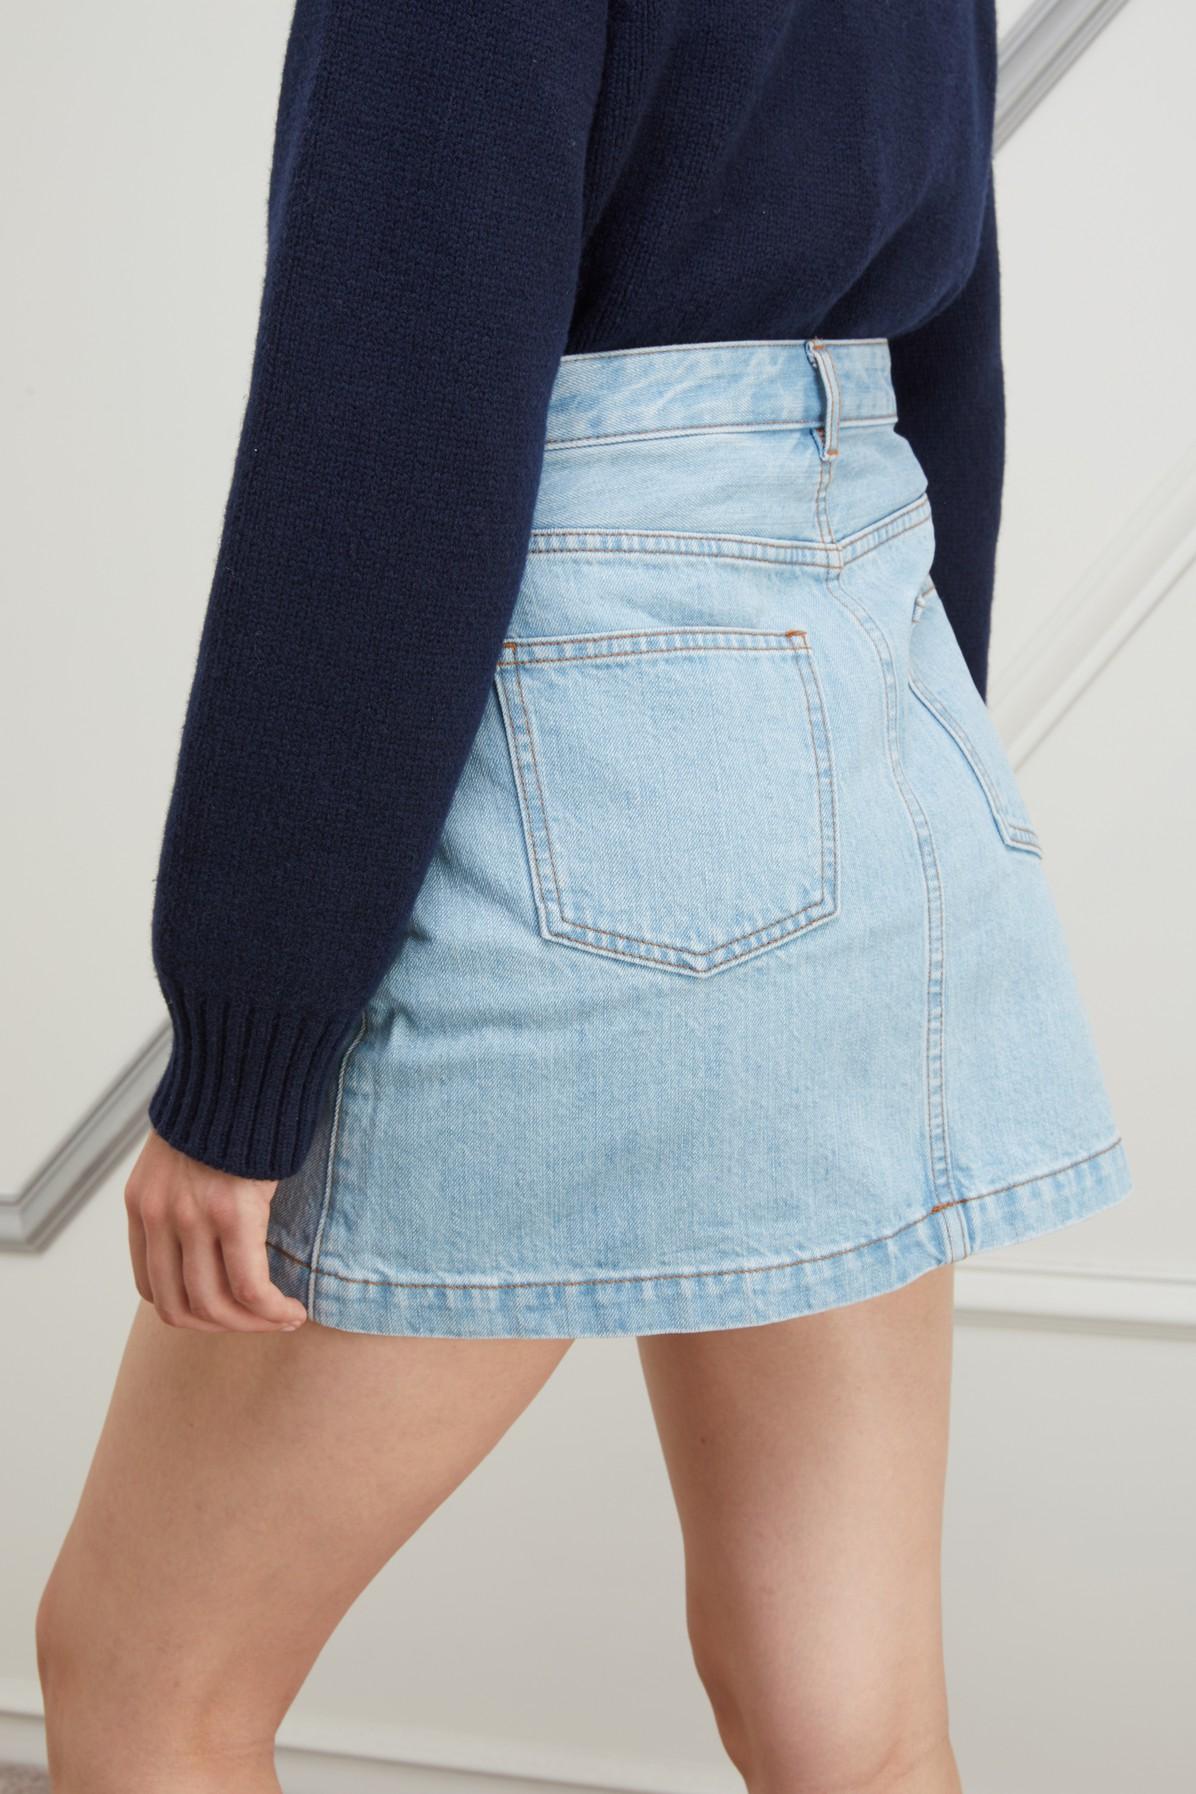 A.P.C. Fanny Skirt in Blue - Lyst